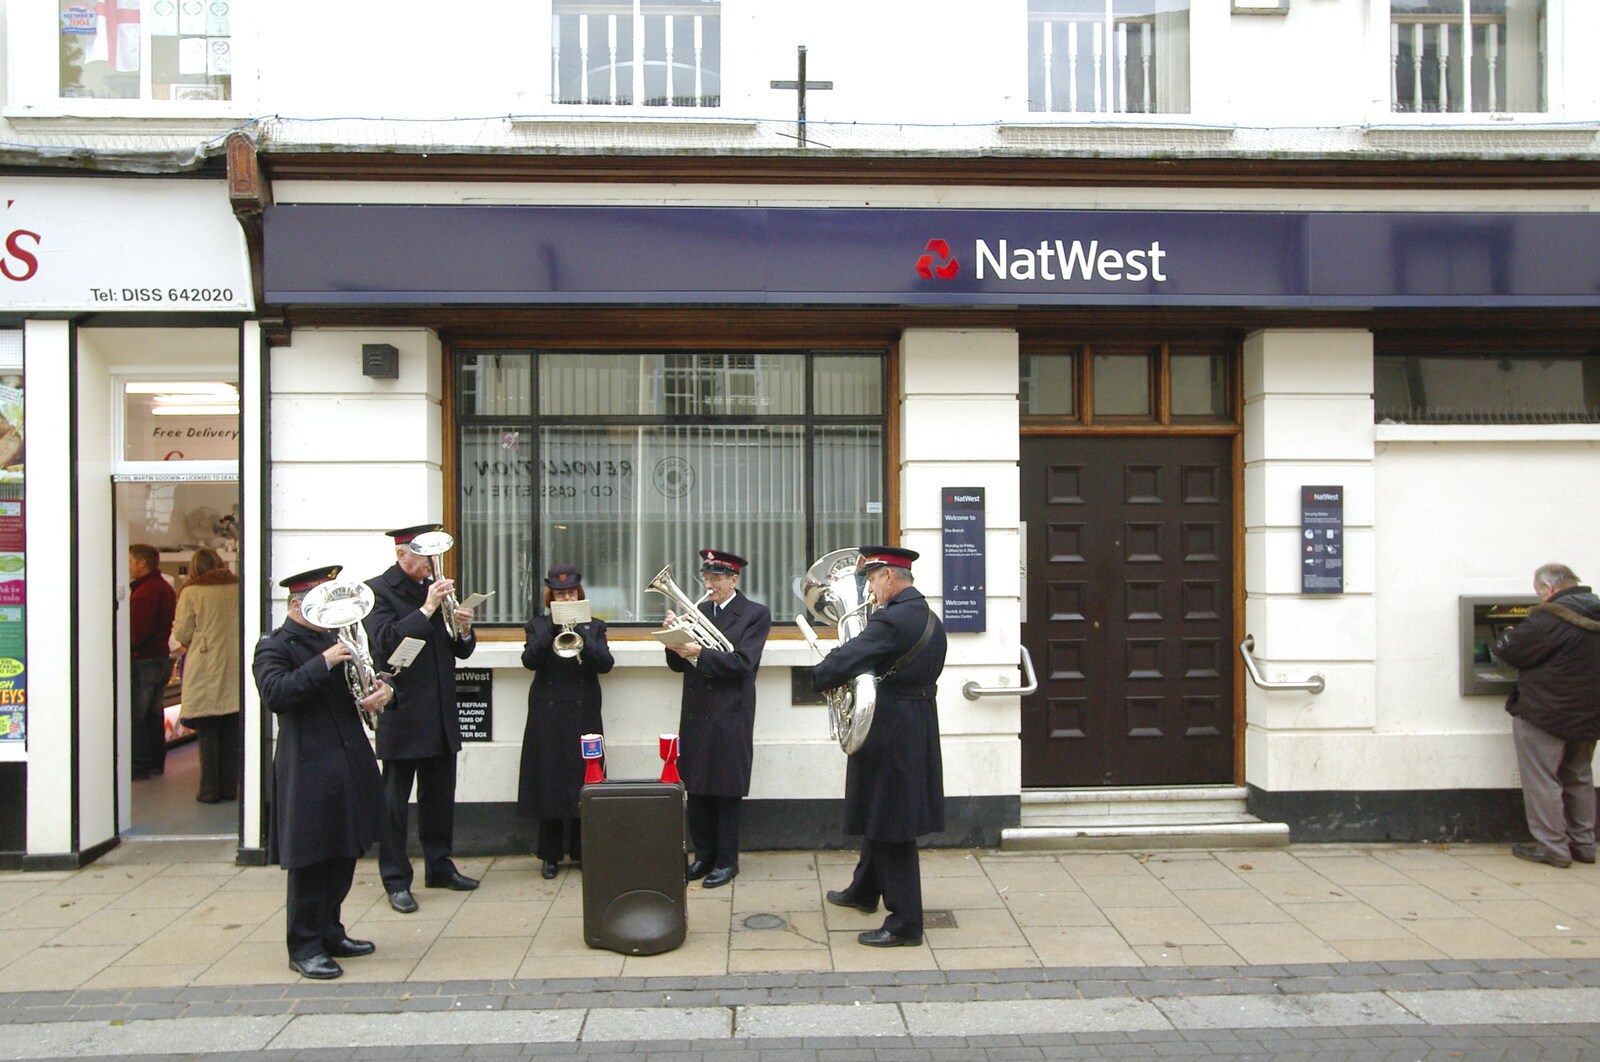 The Salvation Army band plays from Post-modern Alienation: Bleak House, a Diss Miscellany, Norfolk - 3rd December 2005